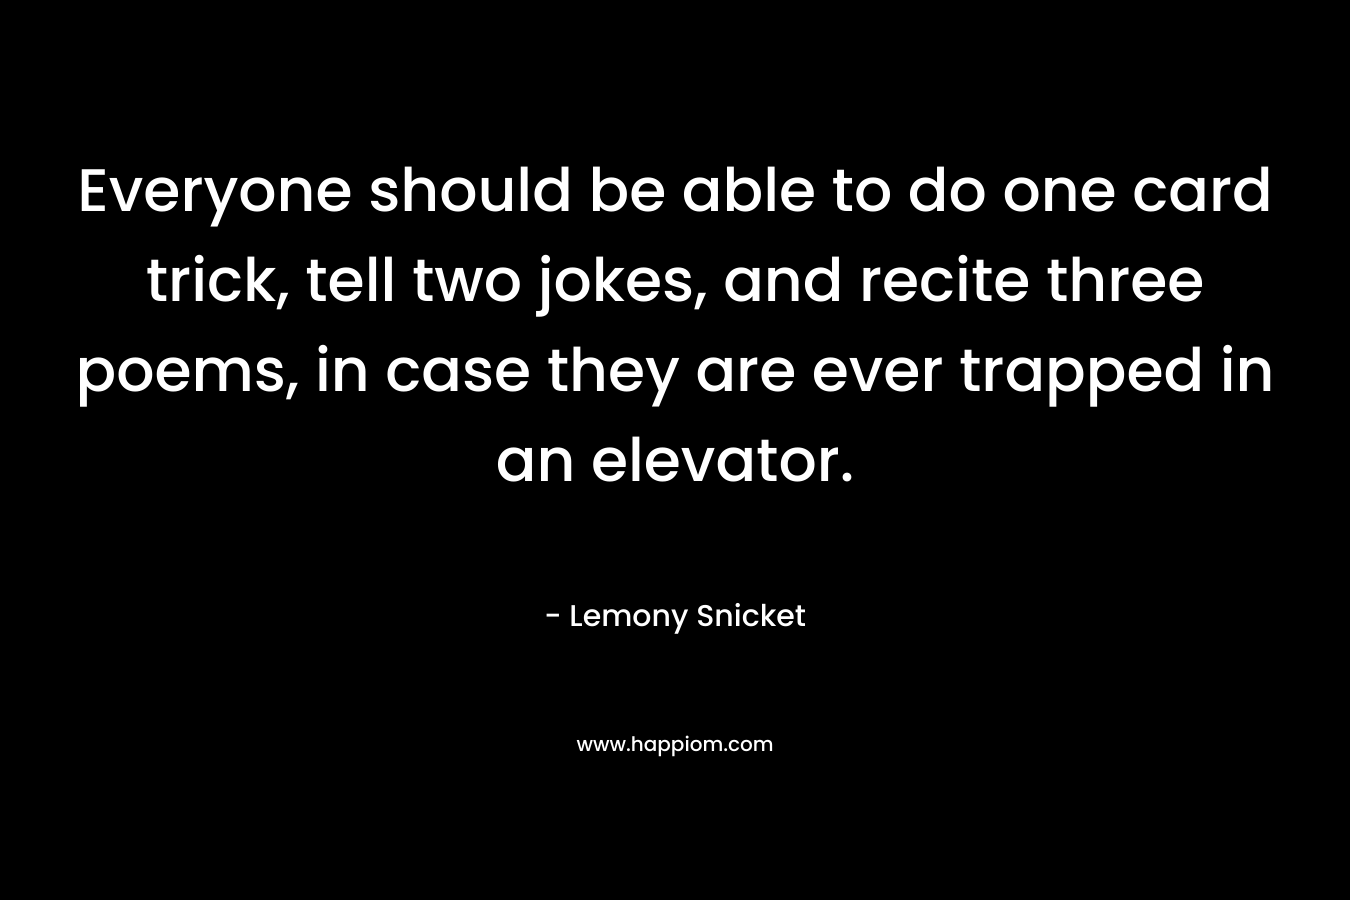 Everyone should be able to do one card trick, tell two jokes, and recite three poems, in case they are ever trapped in an elevator.